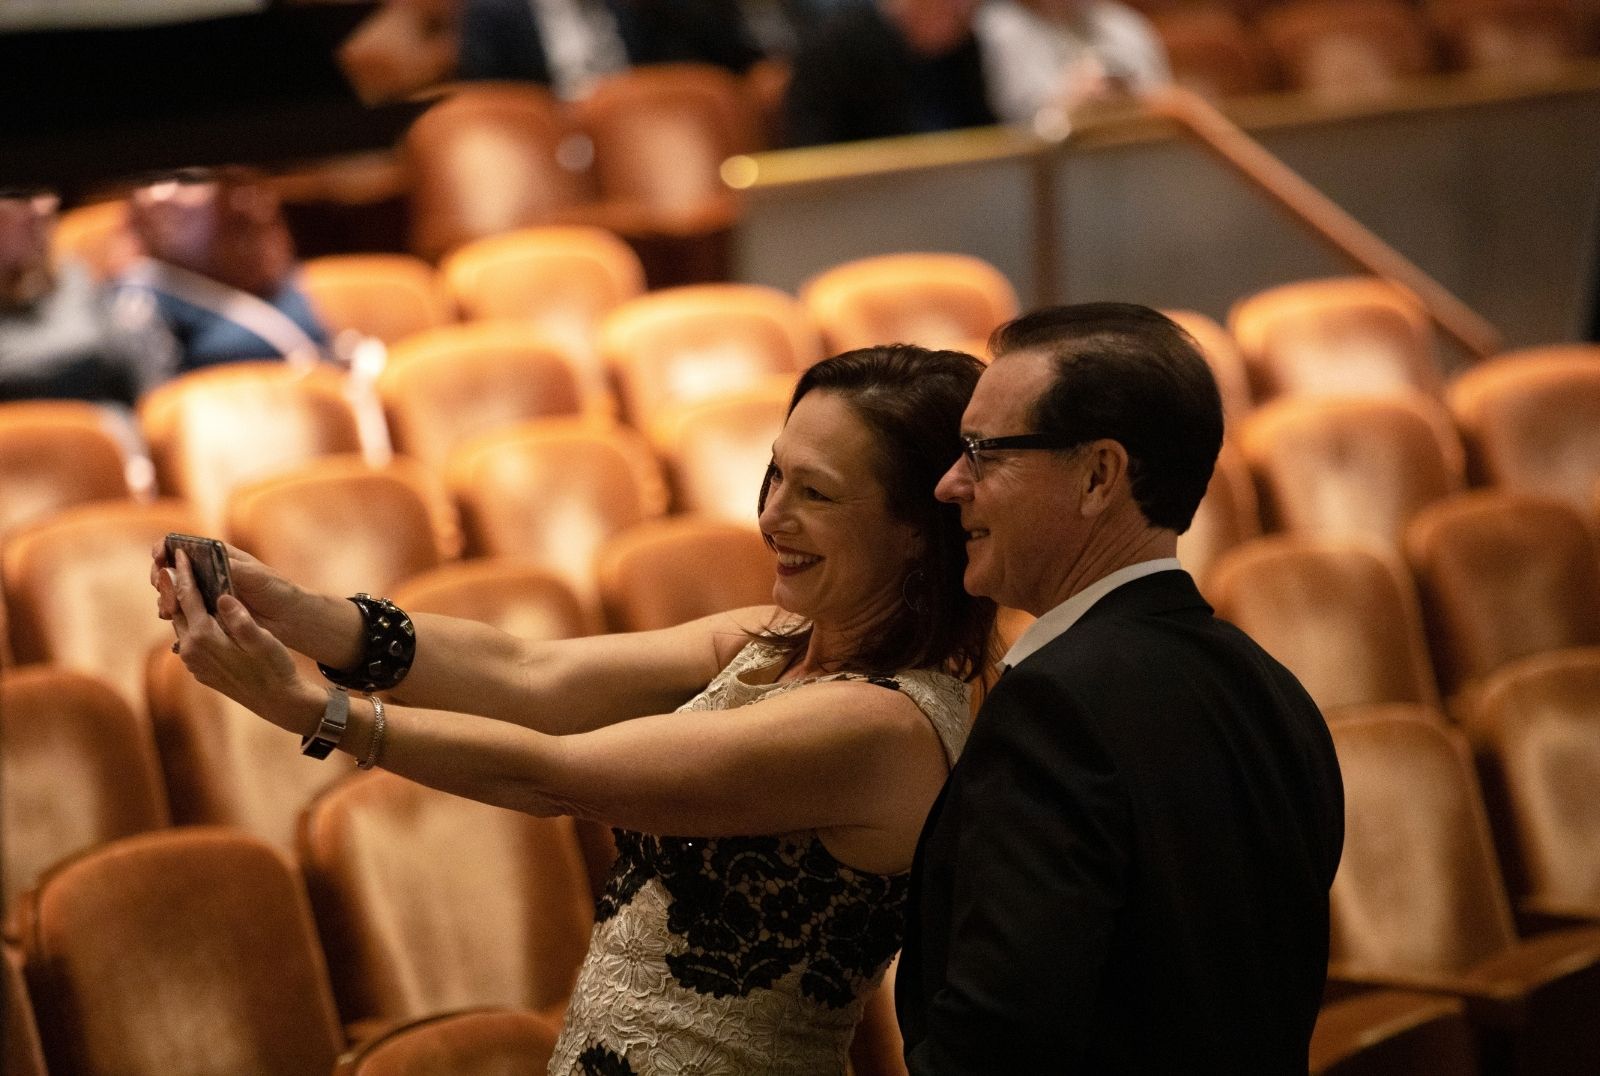 DSO patrons taking selfies to share on social media